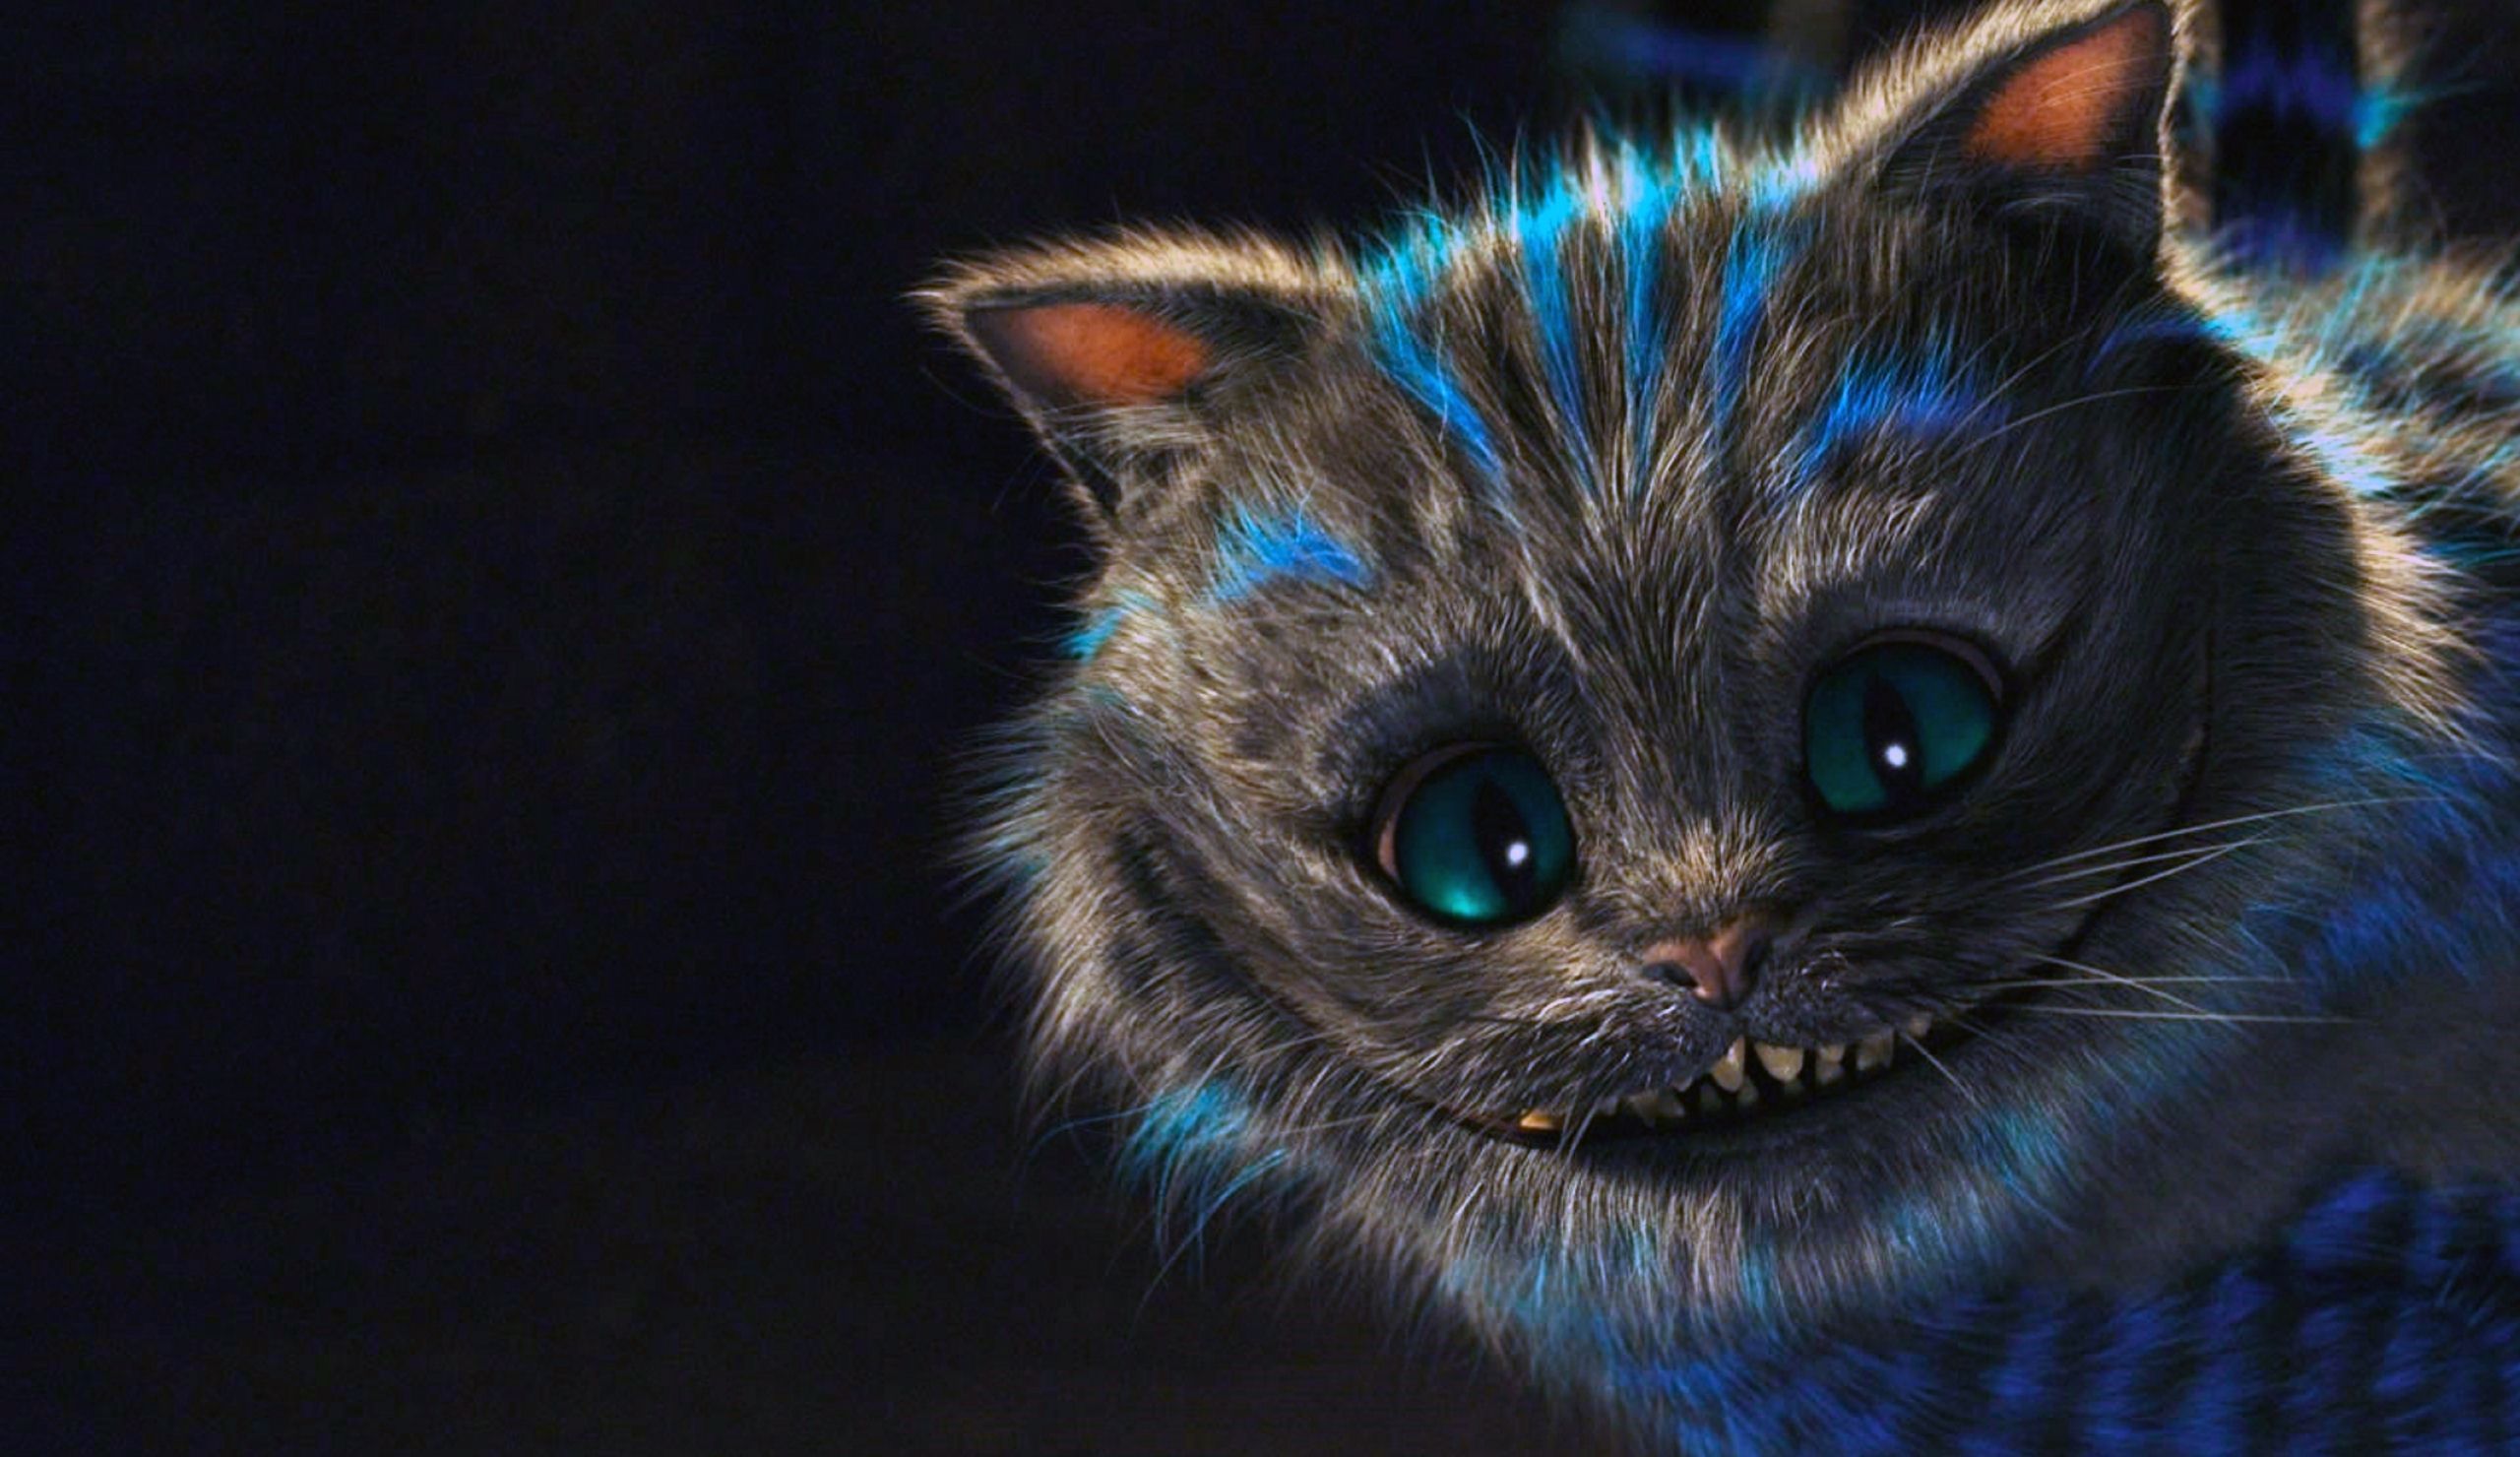 A Cheshire cat with blue fur and glowing eyes - Cat, magic